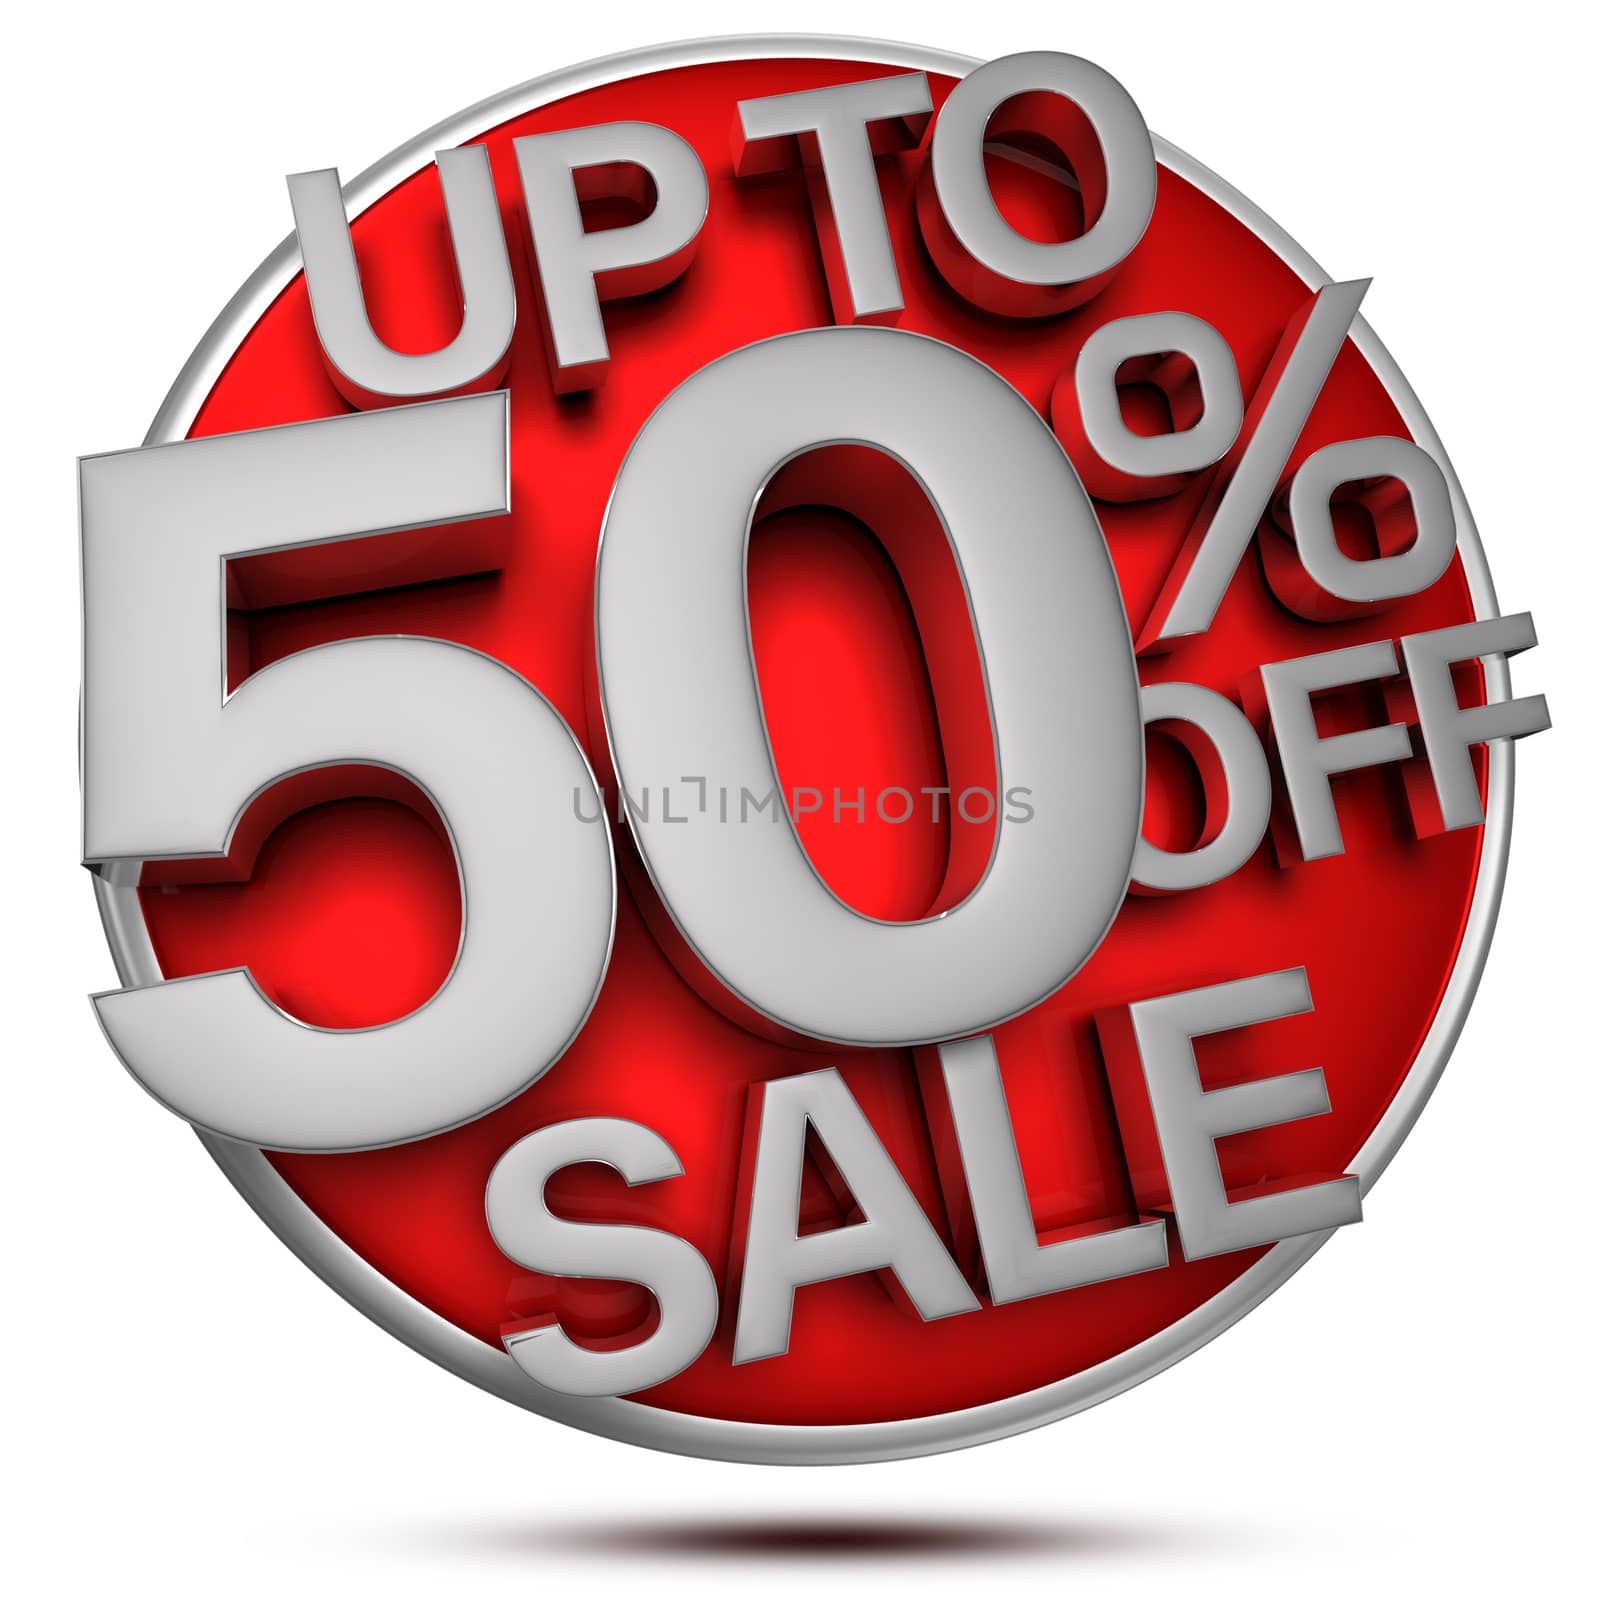 Up to 50 percent off sale 3d. by thitimontoyai